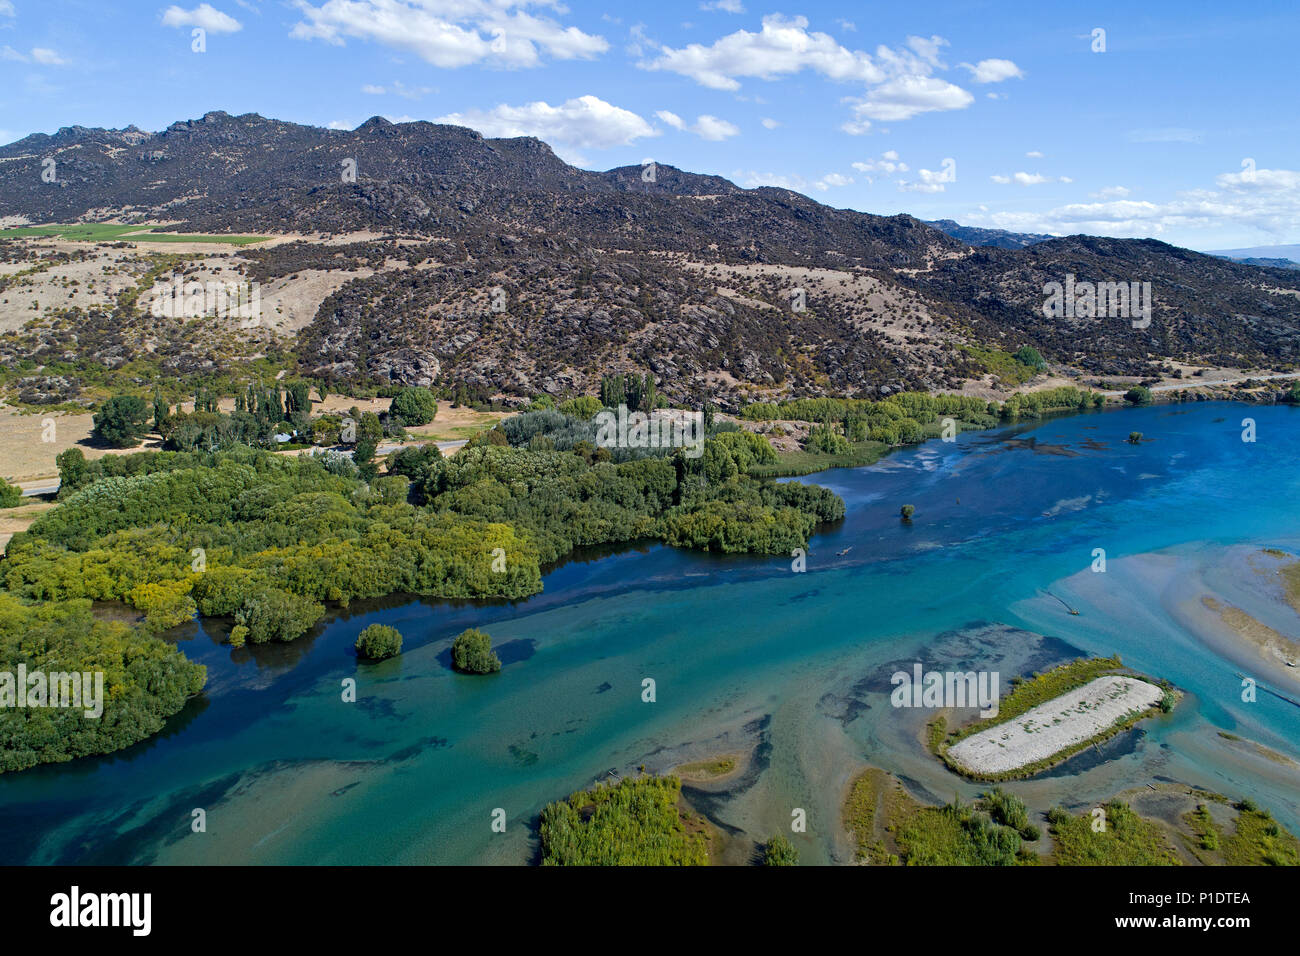 Clutha River entering Lake Dunstan, Central Otago, South Island, New Zealand - drone aerial Stock Photo